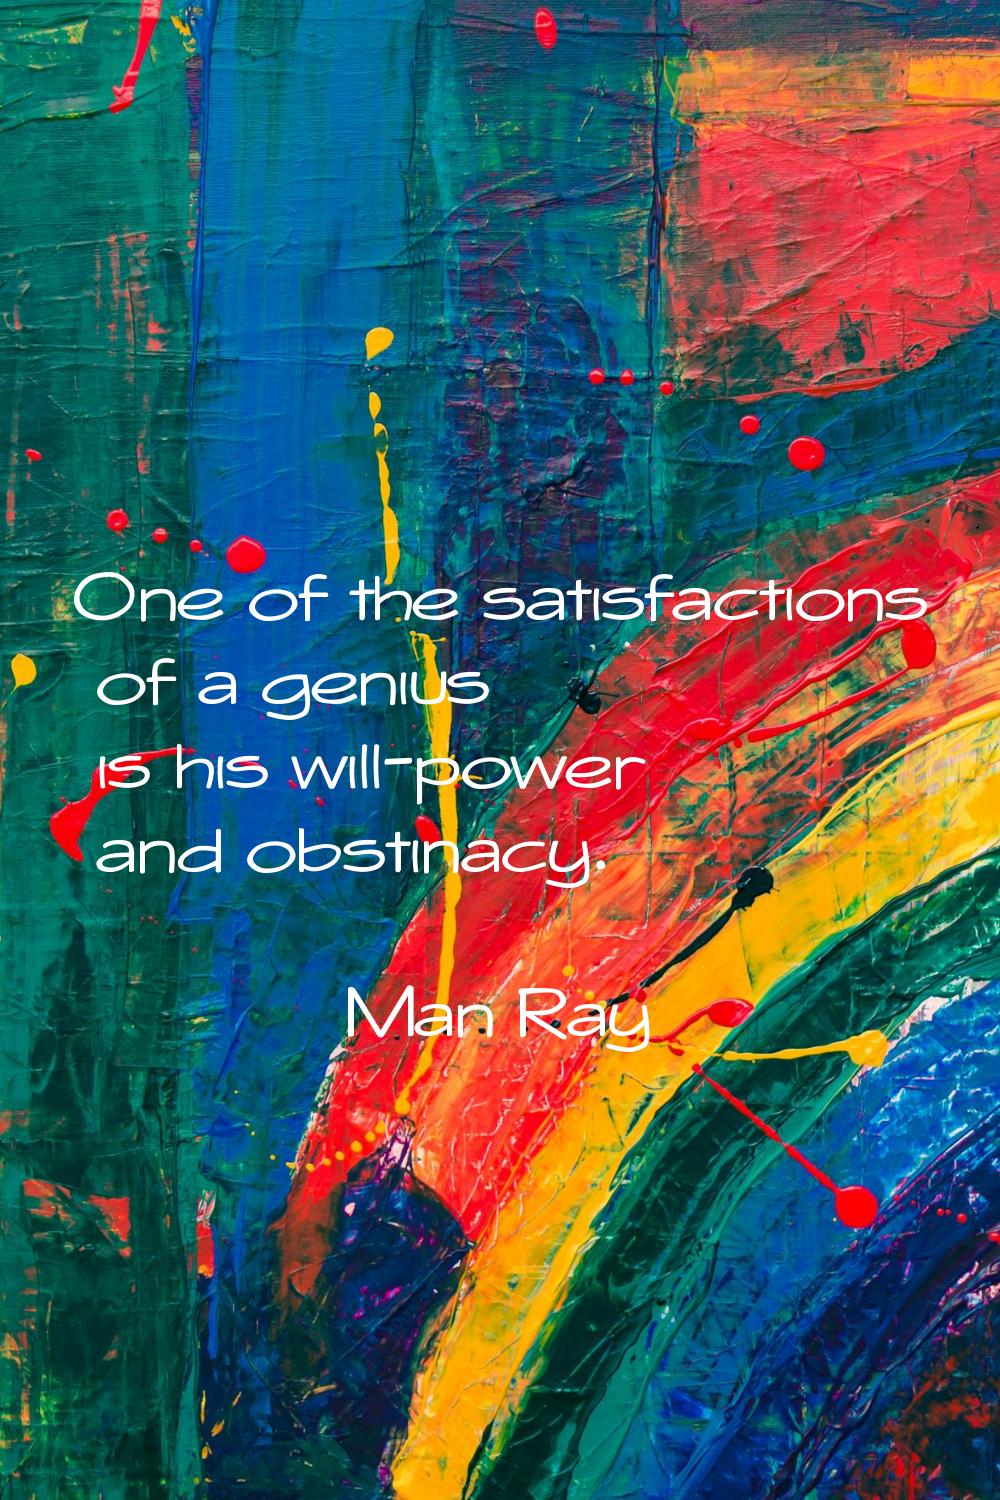 One of the satisfactions of a genius is his will-power and obstinacy.